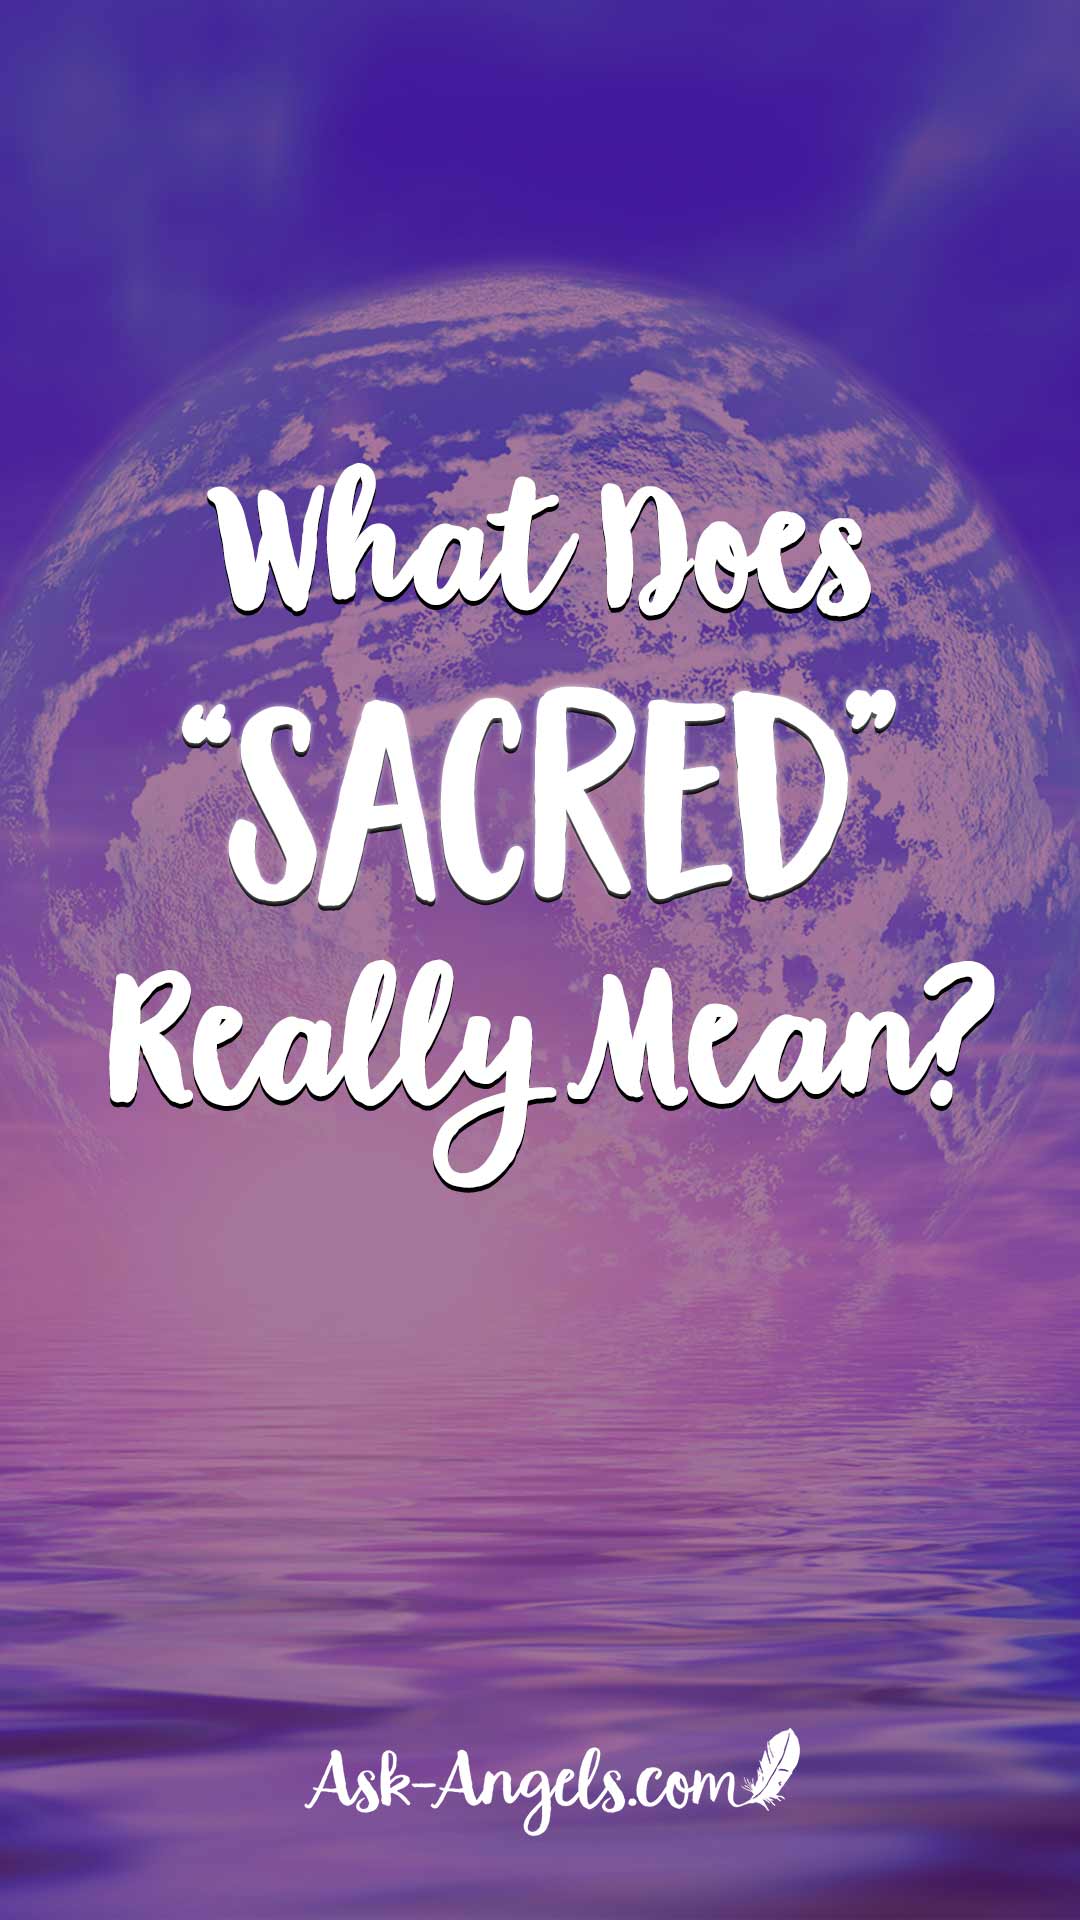 What does "sacred" really mean? Find out in my new post about the difference between "scared" and "sacred"